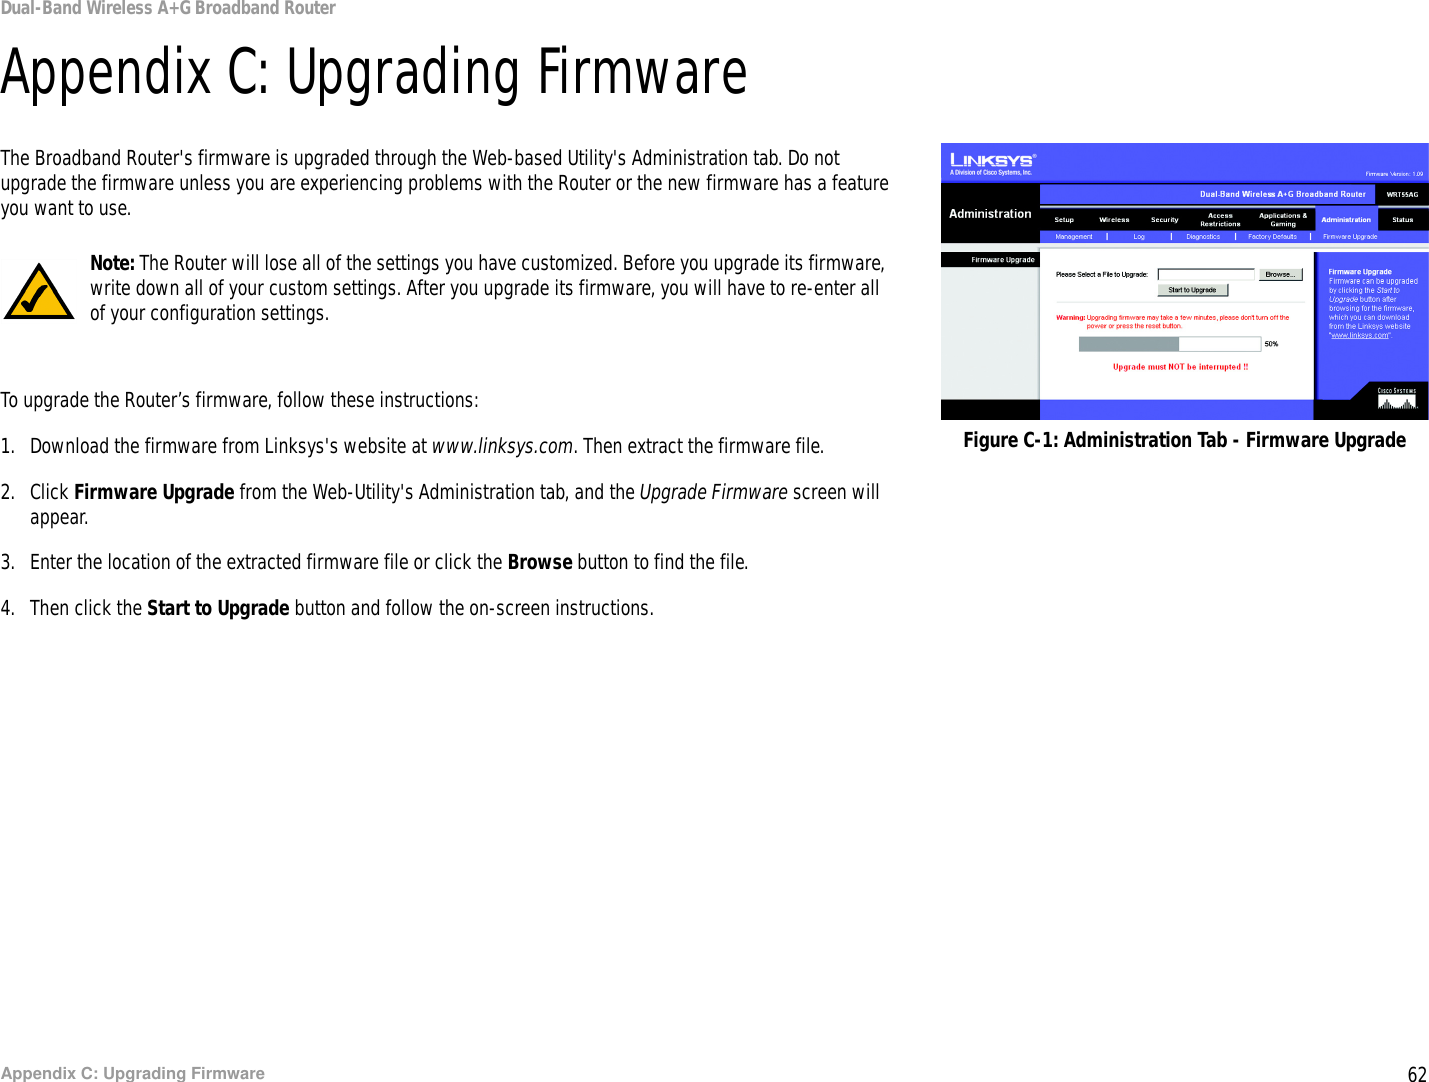 62Appendix C: Upgrading FirmwareDual-Band Wireless A+G Broadband RouterAppendix C: Upgrading FirmwareThe Broadband Router&apos;s firmware is upgraded through the Web-based Utility&apos;s Administration tab. Do not upgrade the firmware unless you are experiencing problems with the Router or the new firmware has a feature you want to use.To upgrade the Router’s firmware, follow these instructions:1. Download the firmware from Linksys&apos;s website at www.linksys.com. Then extract the firmware file.2. Click Firmware Upgrade from the Web-Utility&apos;s Administration tab, and the Upgrade Firmware screen will appear.3. Enter the location of the extracted firmware file or click the Browse button to find the file.4. Then click the Start to Upgrade button and follow the on-screen instructions.Figure C-1: Administration Tab - Firmware UpgradeNote: The Router will lose all of the settings you have customized. Before you upgrade its firmware, write down all of your custom settings. After you upgrade its firmware, you will have to re-enter all of your configuration settings.